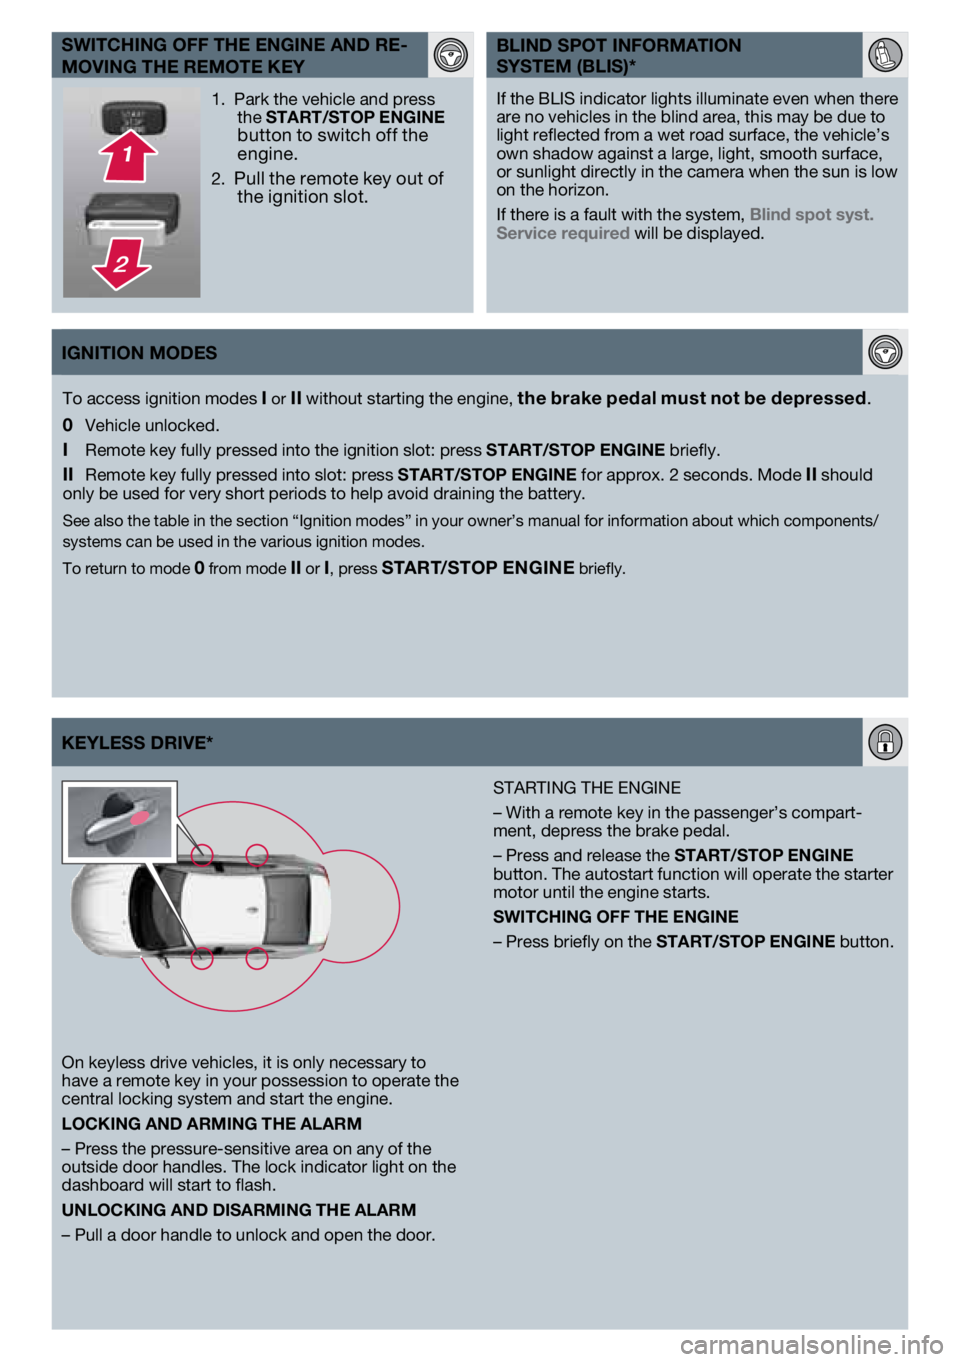 VOLVO S80 2013  Quick Guide KEYlESS dRIvE*
On keyless drive vehicles, it is only necessary to 
have a remote key in your possession to operate the 
central locking system and start the engine. 
lOCKING ANd ARMING THE AlARM
– P